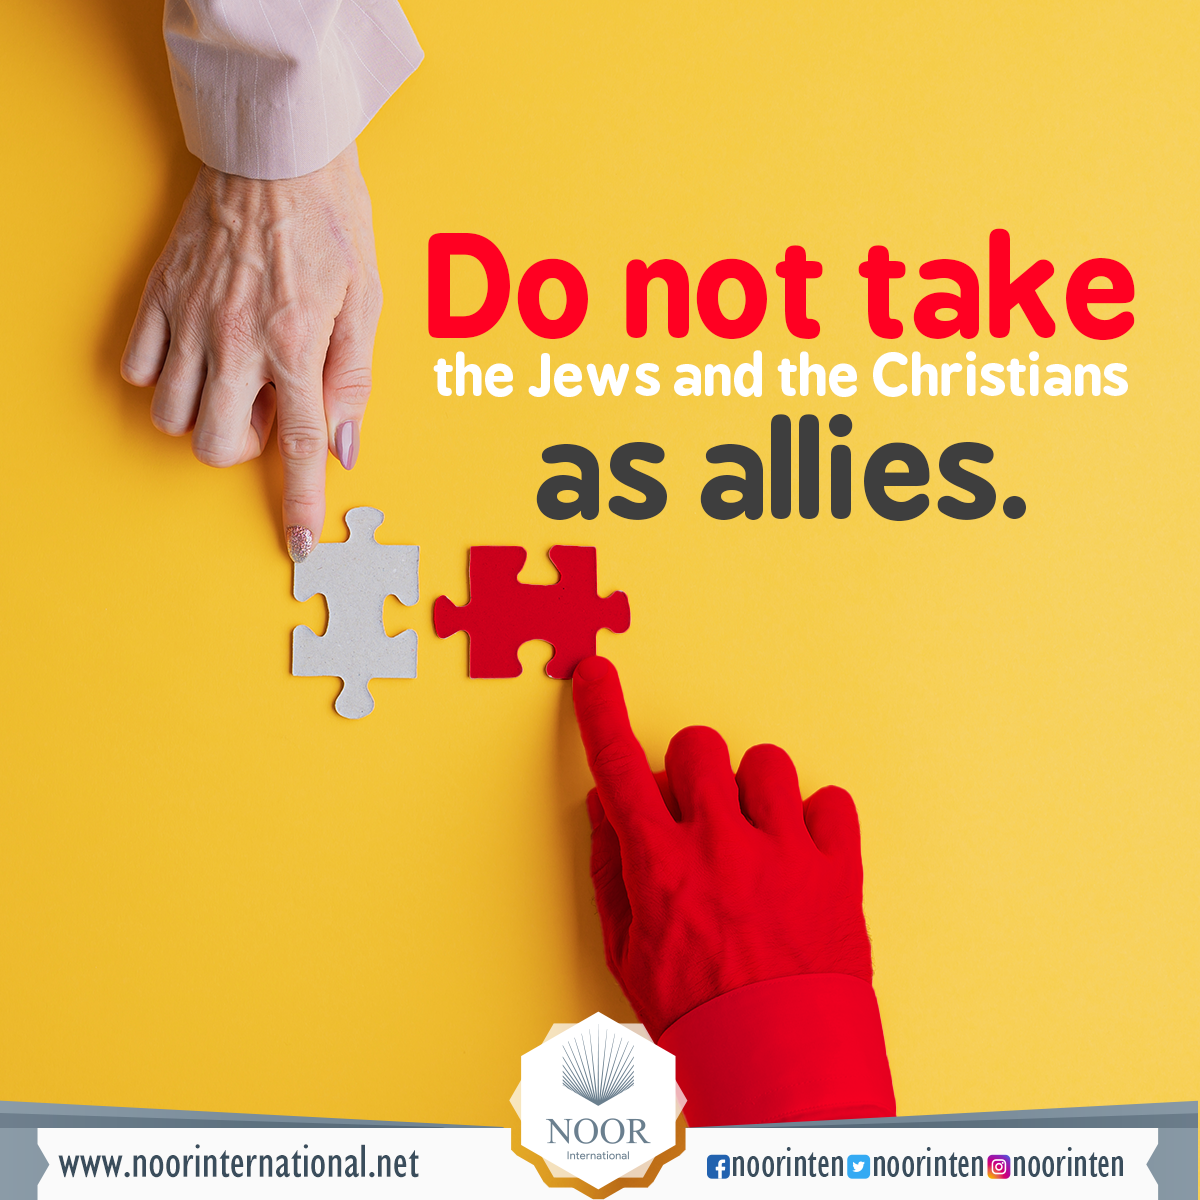 Do not take the Jews and the Christians as allies.